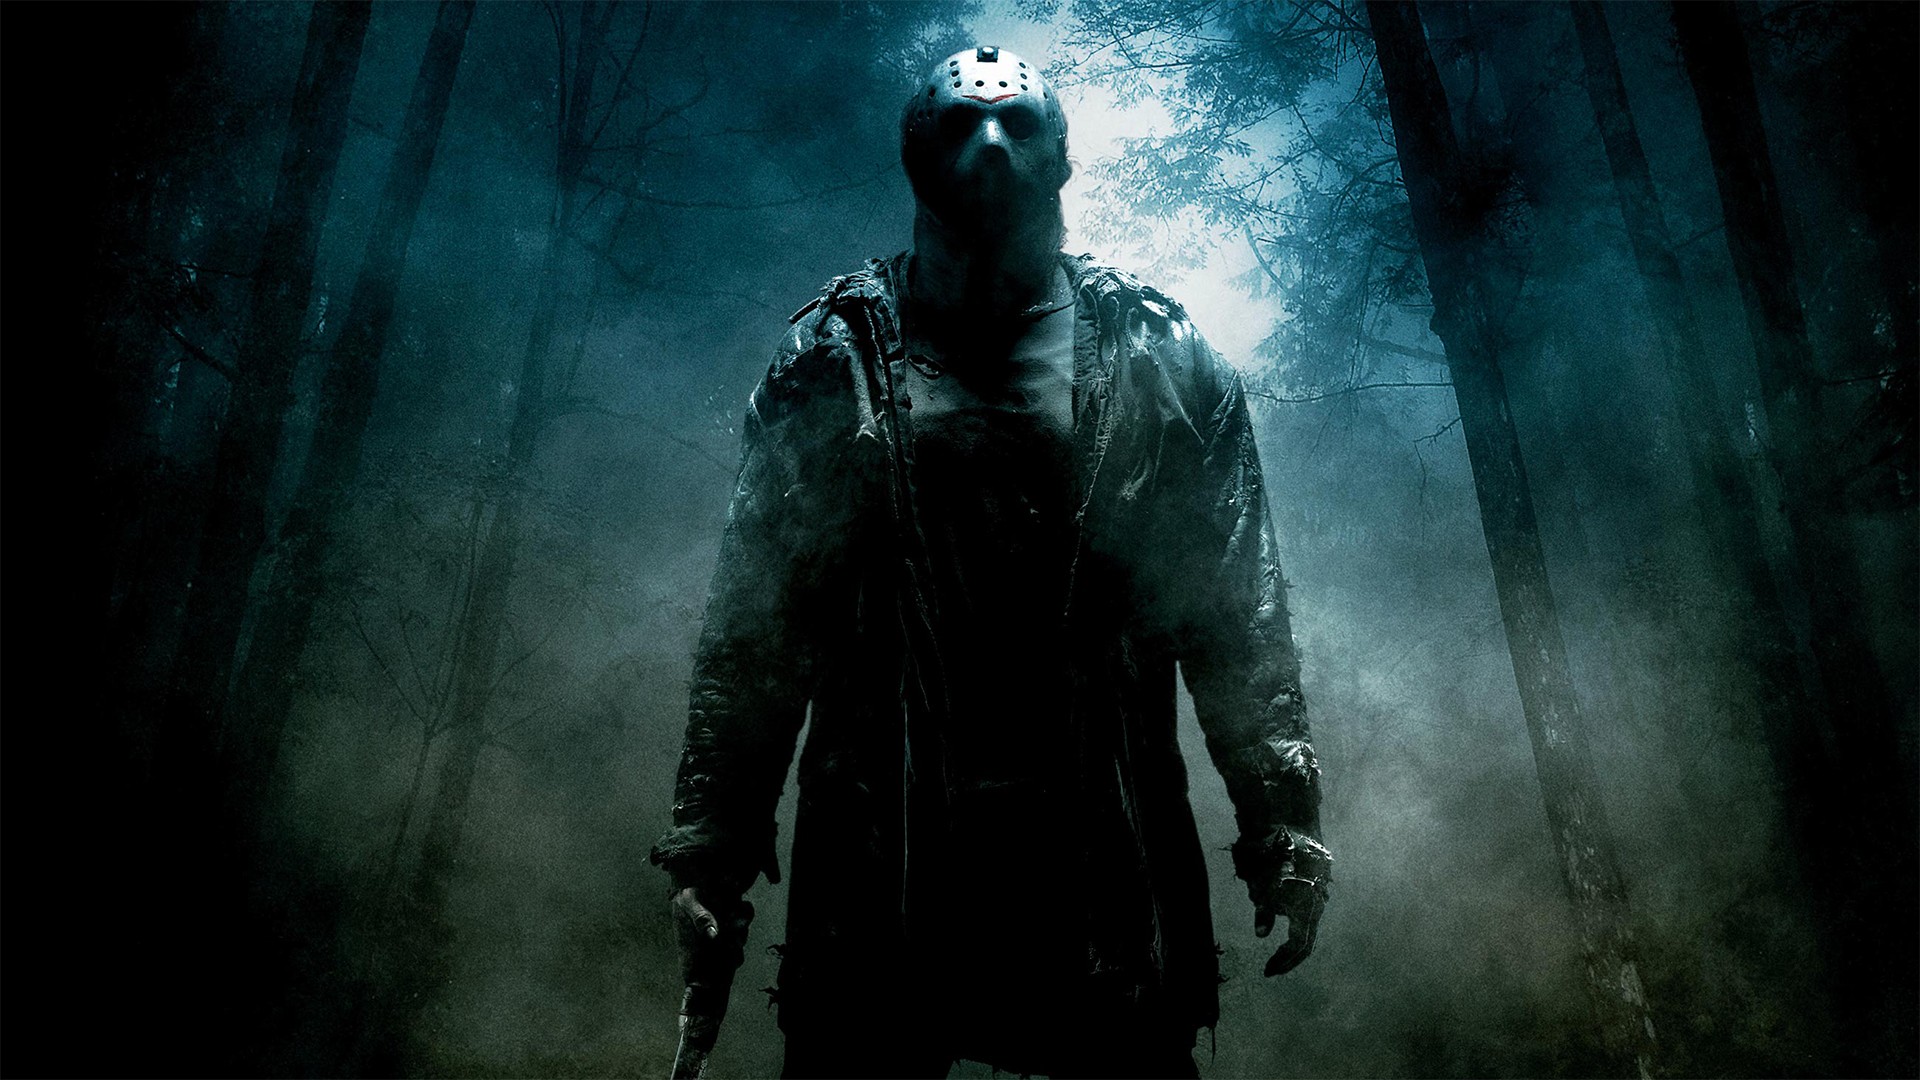 17 Friday The 13th (2009) HD Wallpapers | Backgrounds - Wallpaper ...